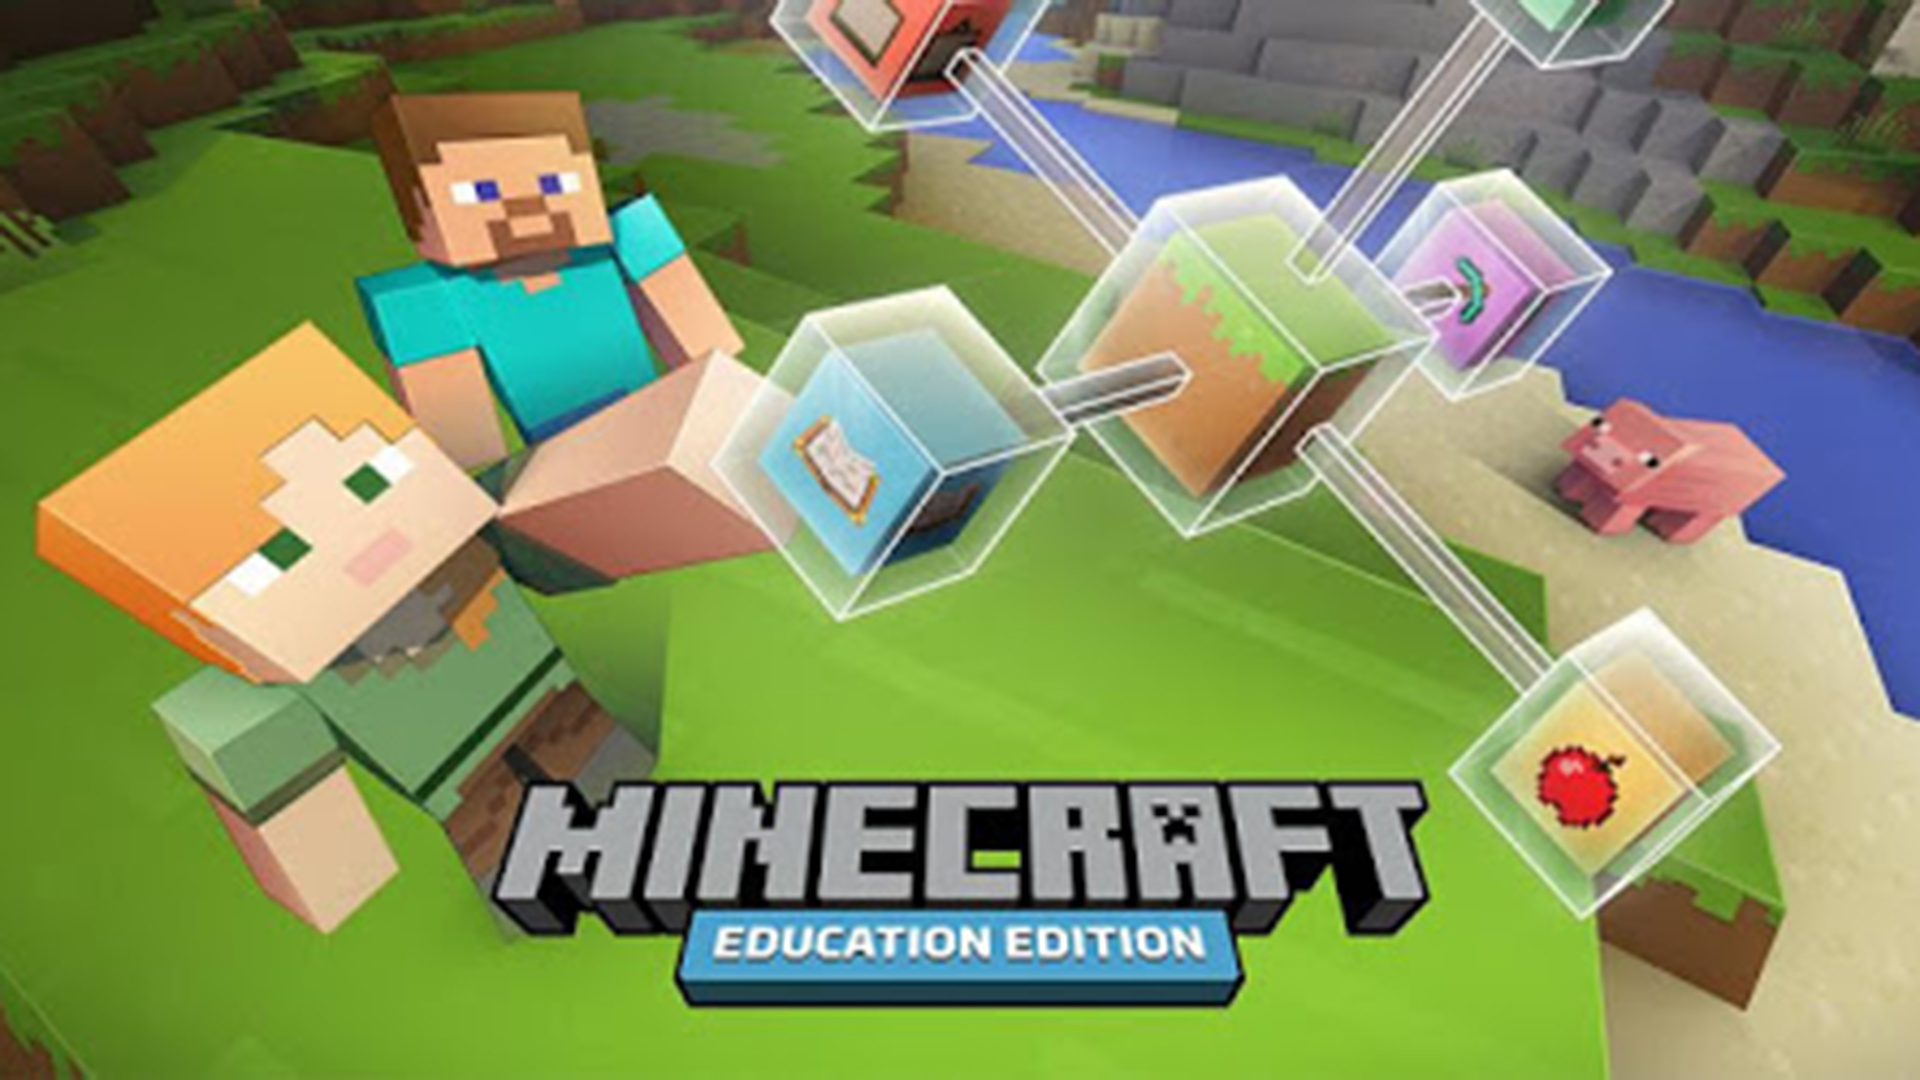 Minecraft Education Challenge - Behind The News